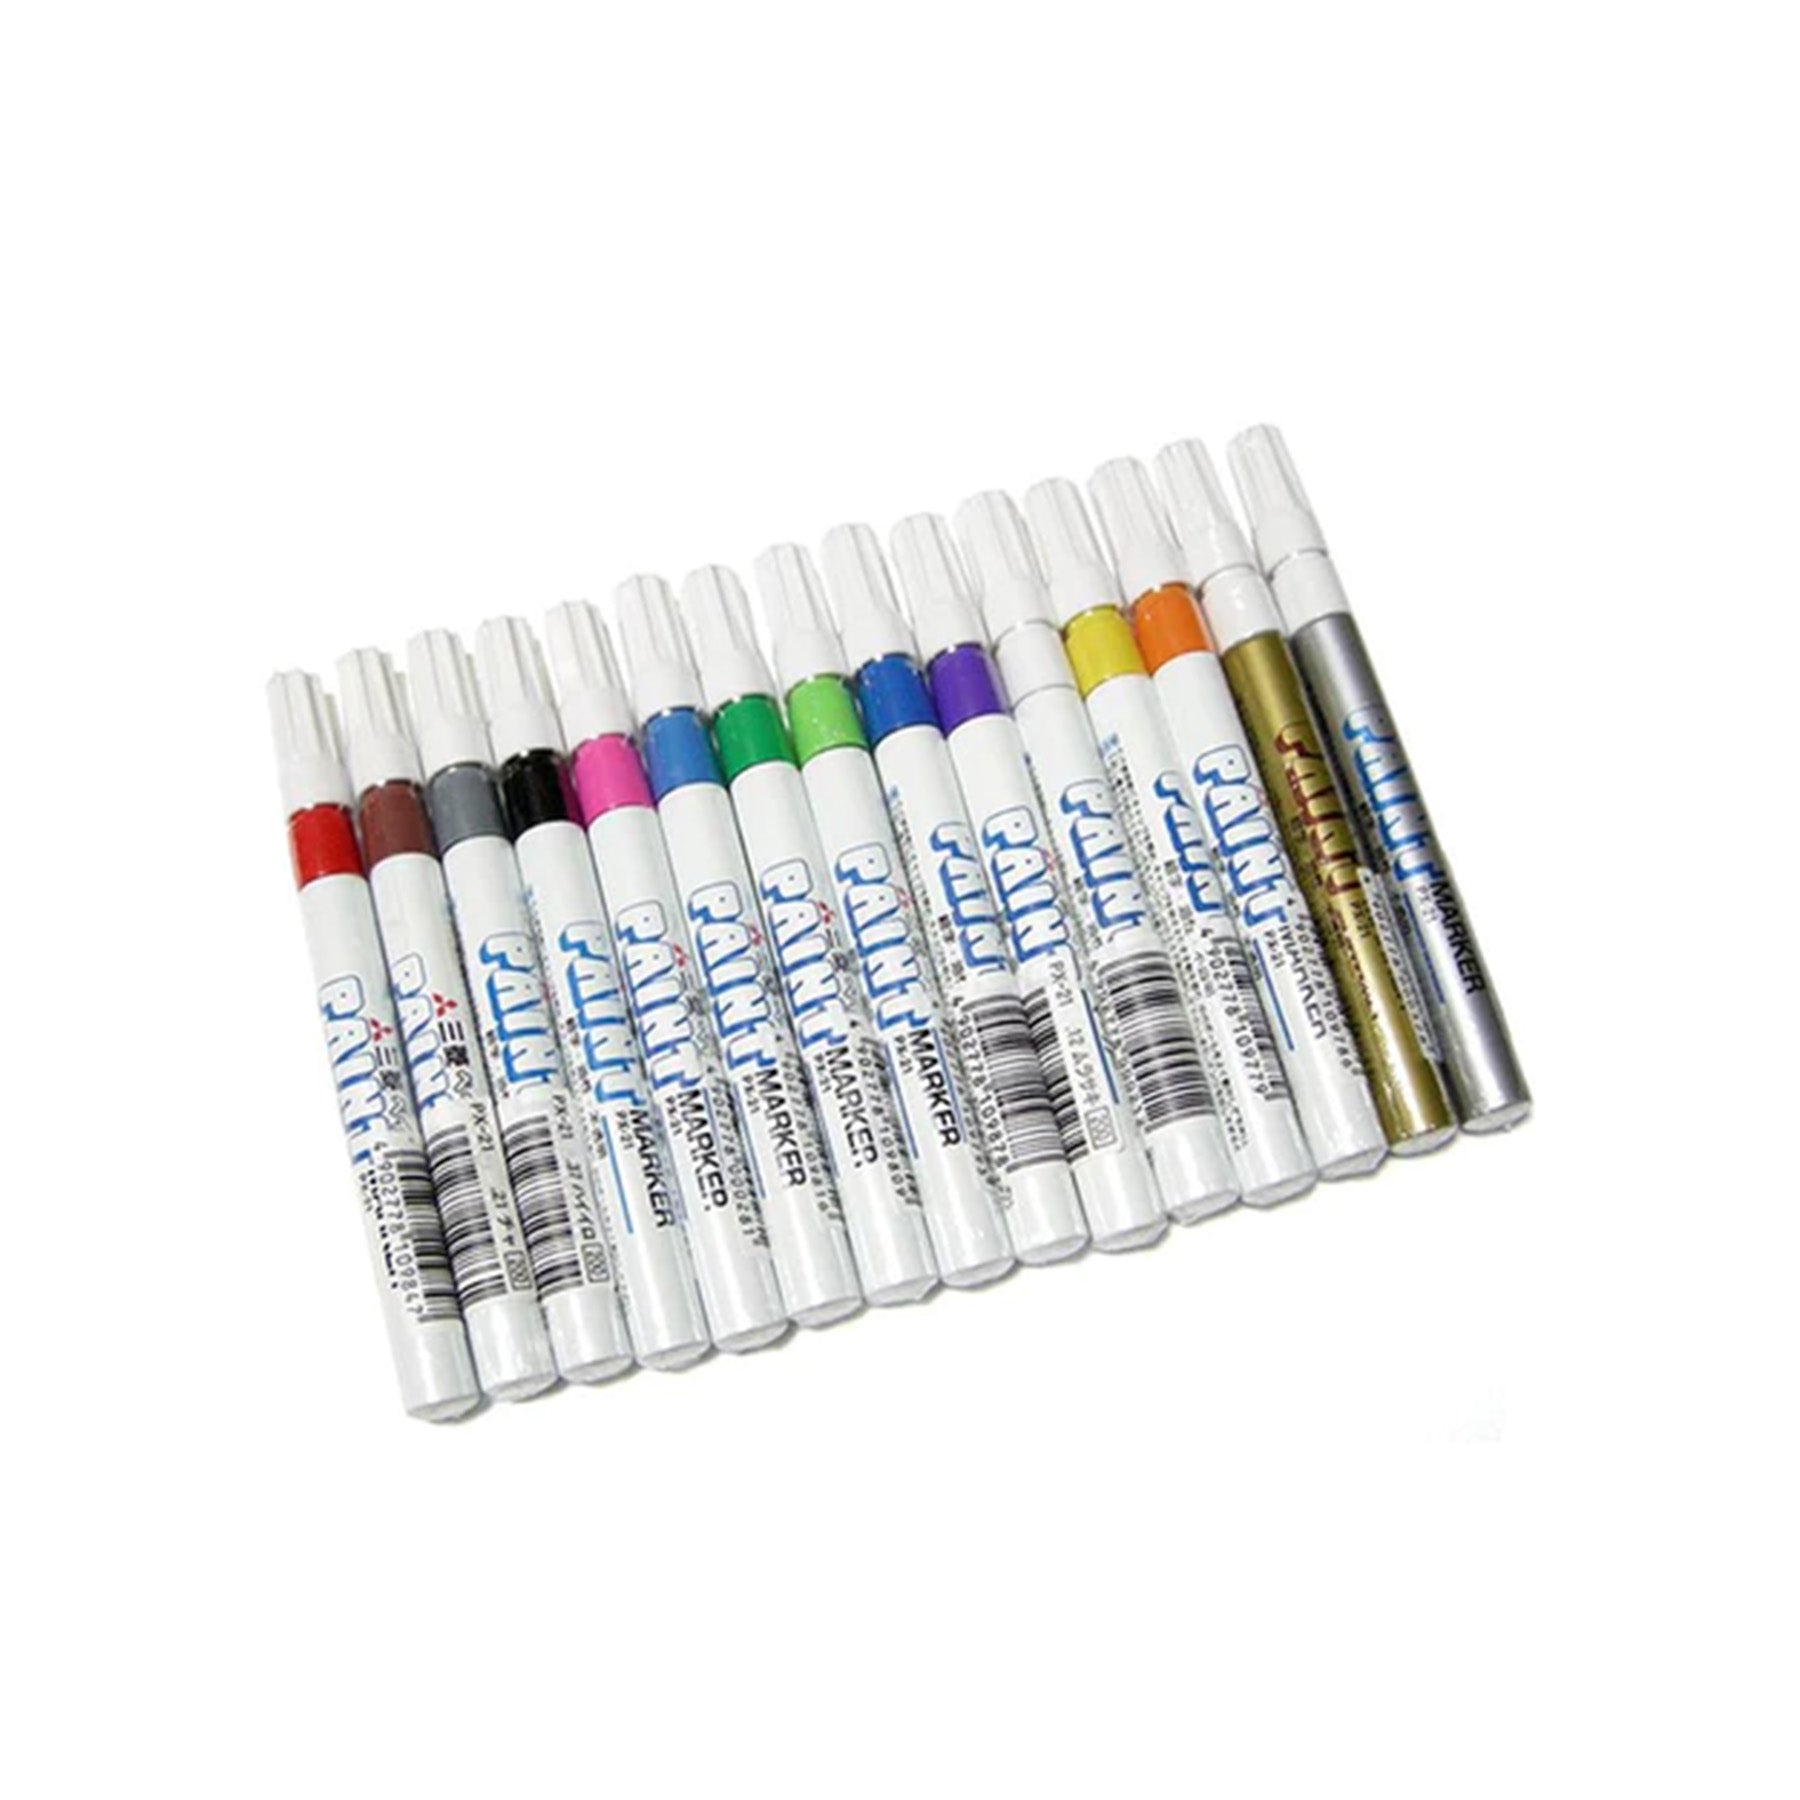 A line up of white markers with colored caps, the label reads "PAINT" on each. From  left to right: red, brown, grey, black, pink, light blue, green, yellow green, blue, violet, white, yellow, orange, gold, silver.